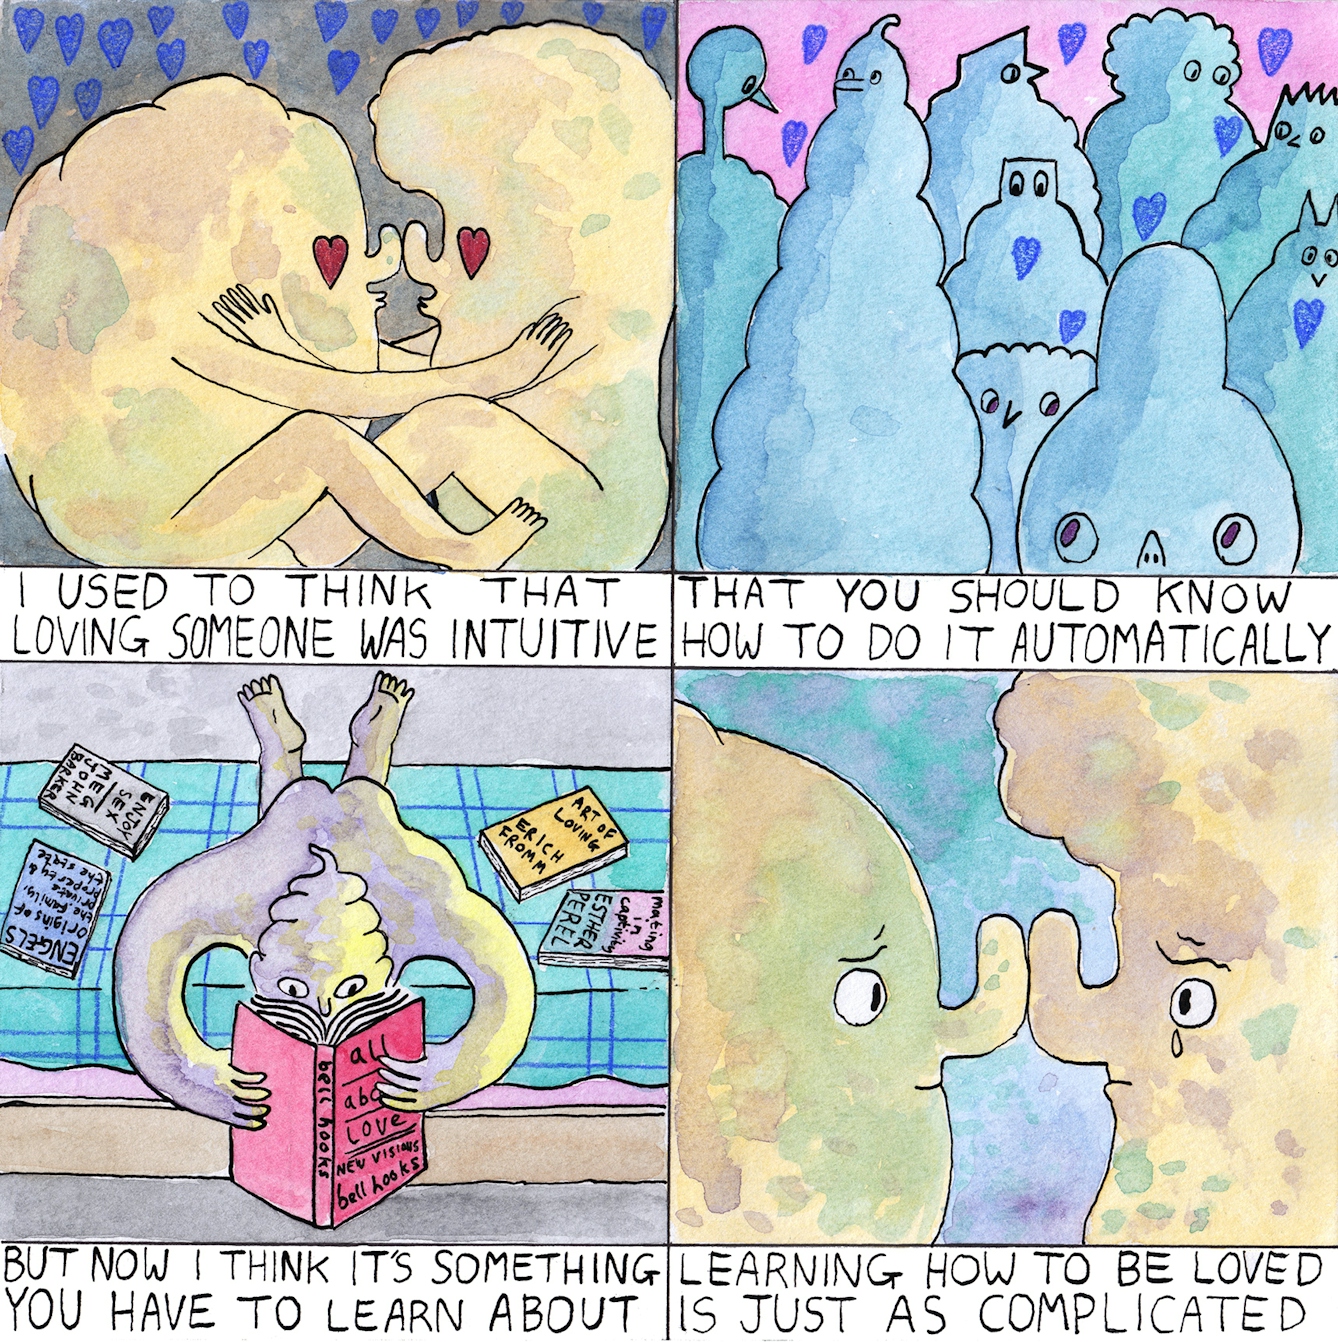 Loving comic by Rob Bidder with four frames. The first frame shows two figures embracing; the second frame depicts a number of figures with love hearts floating above them; the third frame shows a figure in bed reading a book with the title 'all about love' as they are surrounded by other books on love; the final frame has two figures looking emotional with their faces up close as their noses touch.